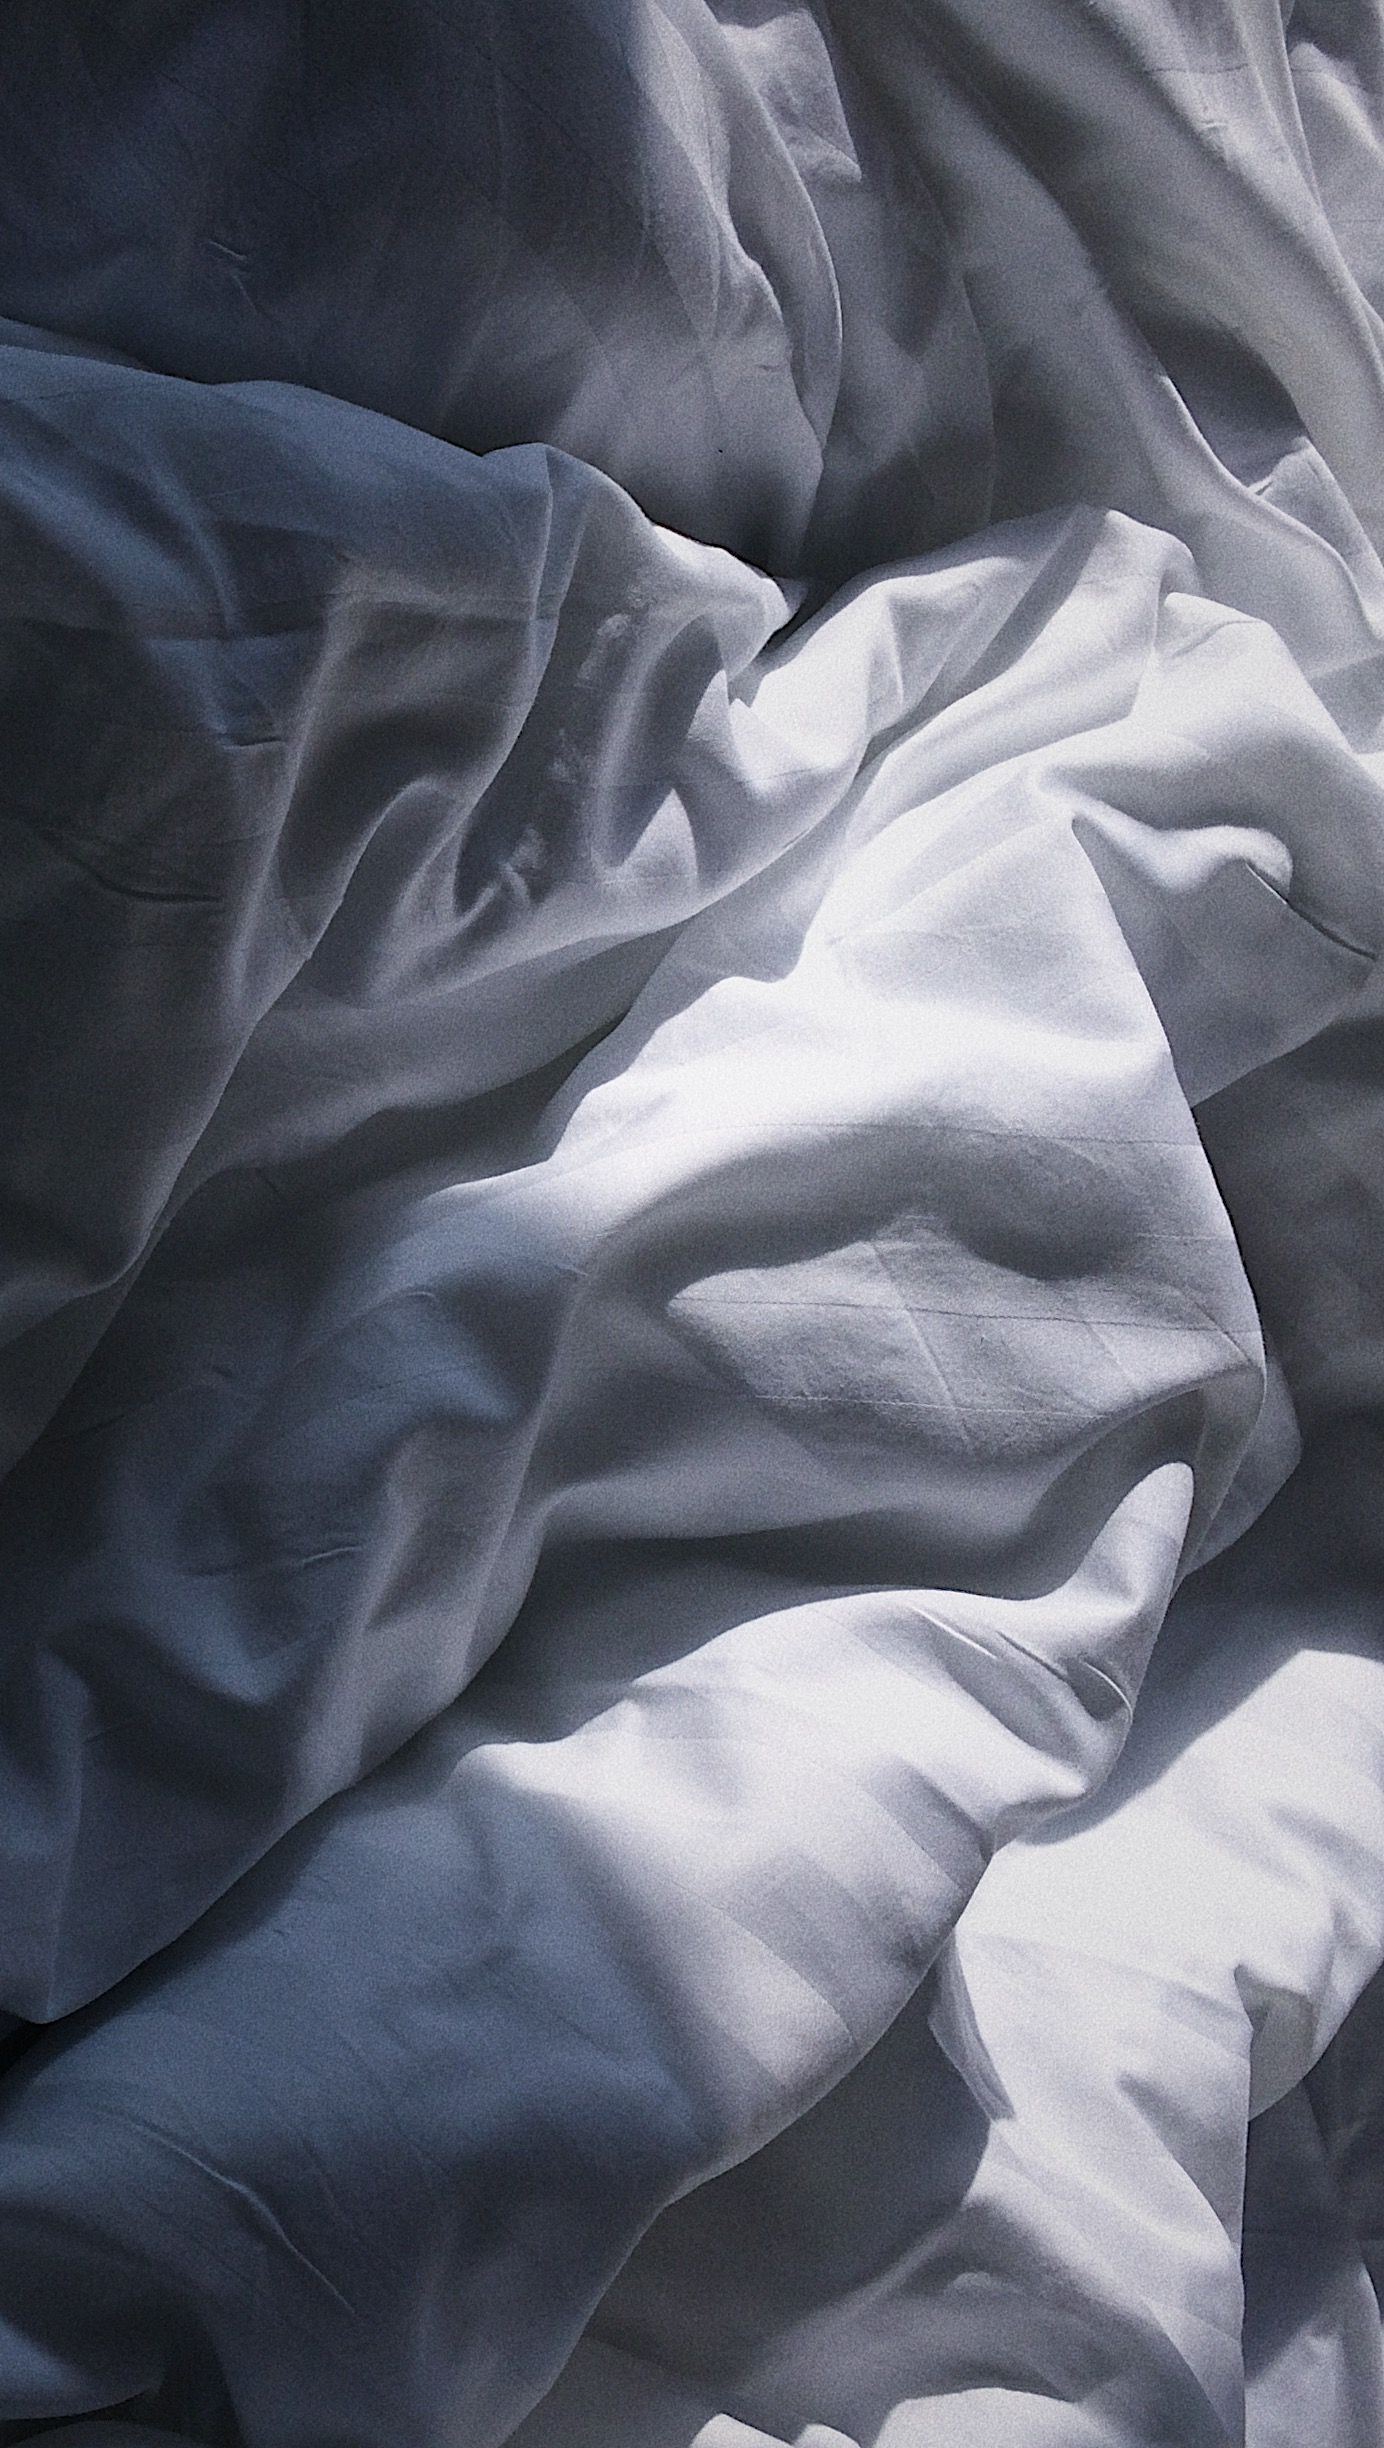 Aesthetic White Bed Sheets - HD Wallpaper 